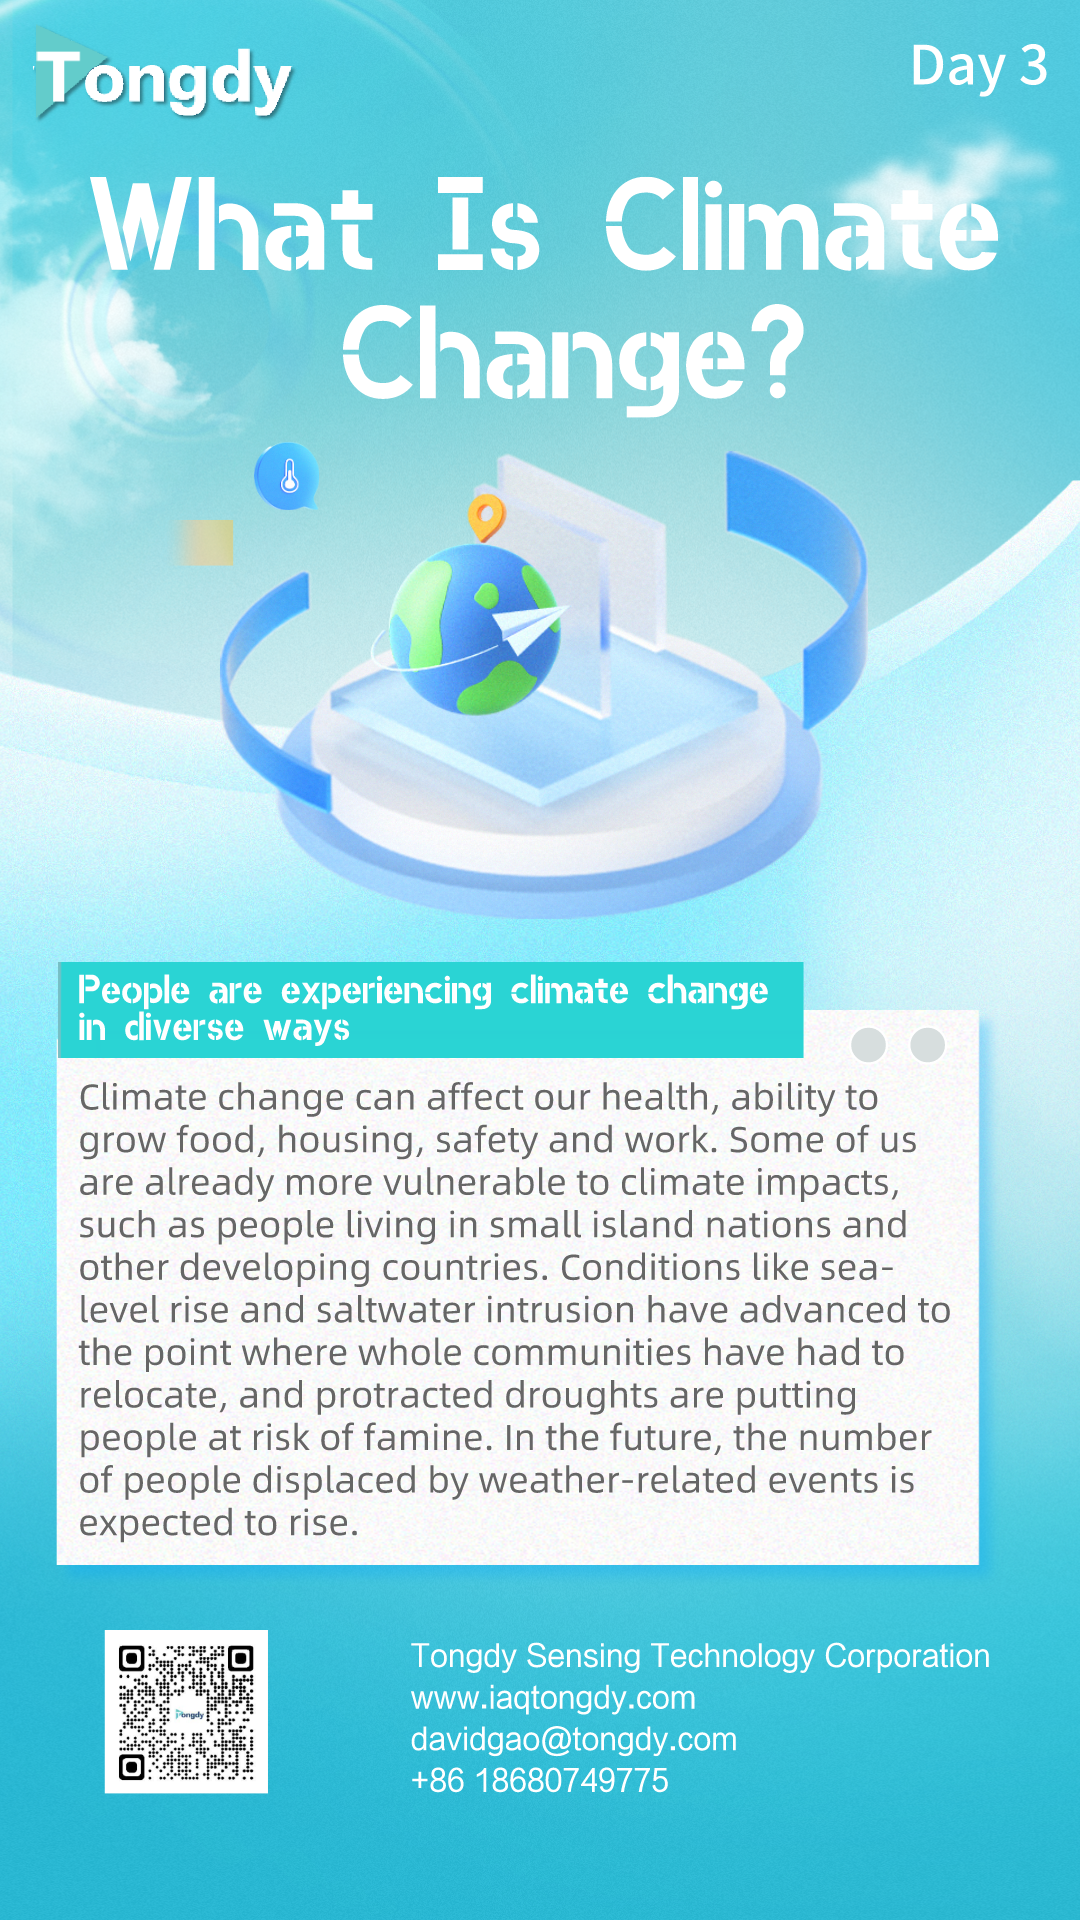 Day 3 What Is Climate Change?